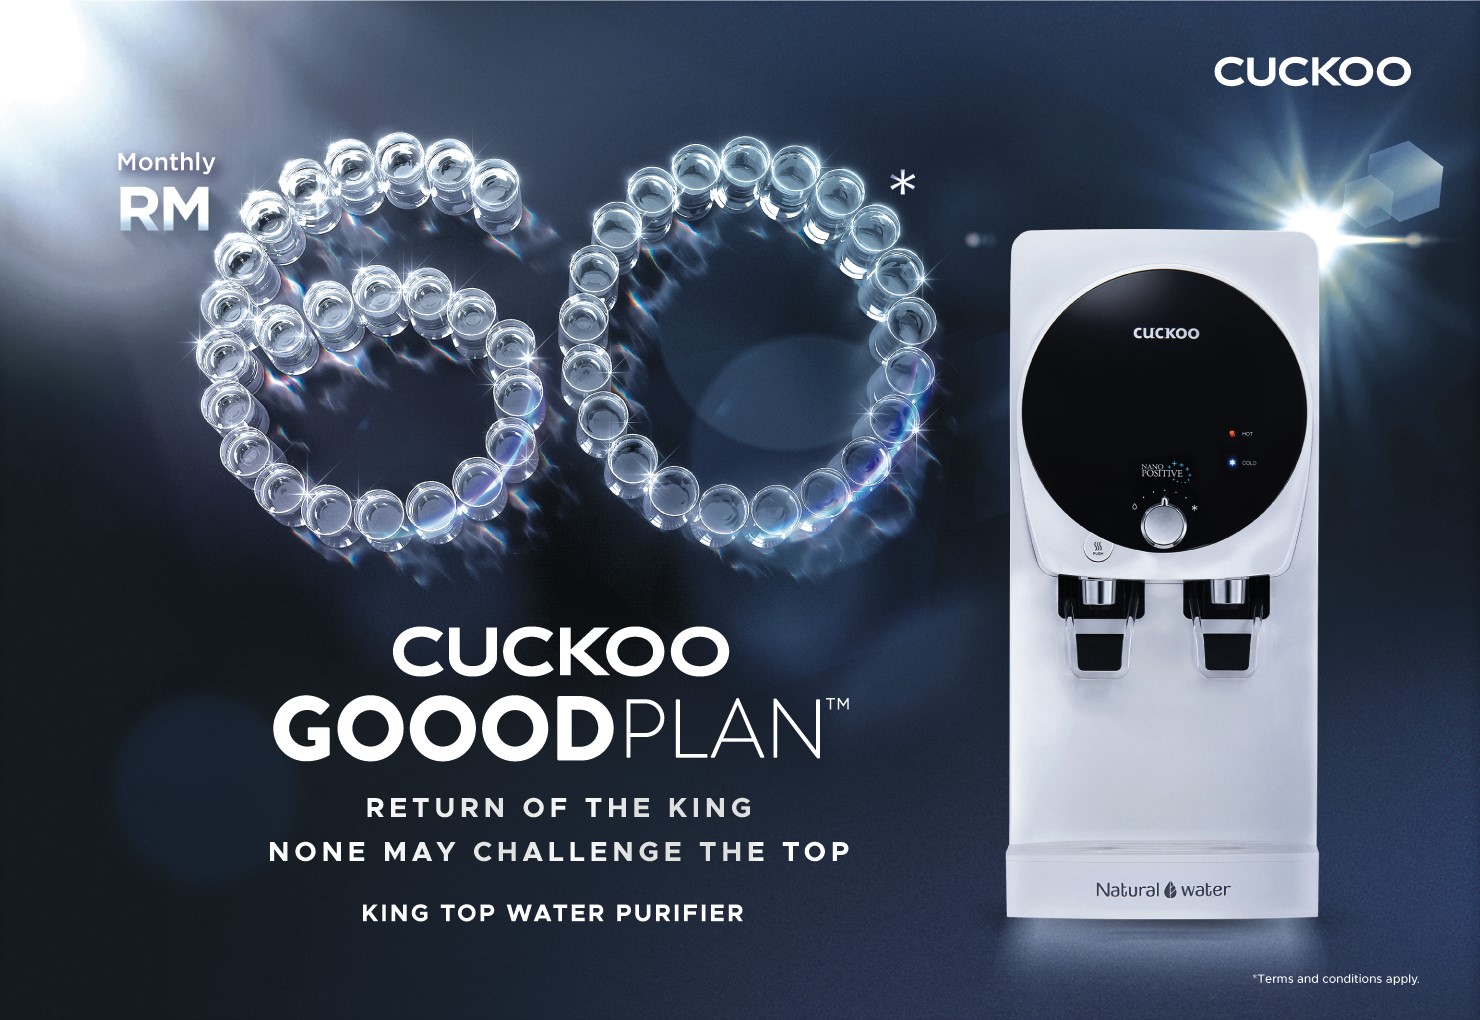 CUCKOO GOOODPLANTM returns with RM60 per month offer for KING TOP Water Purifier